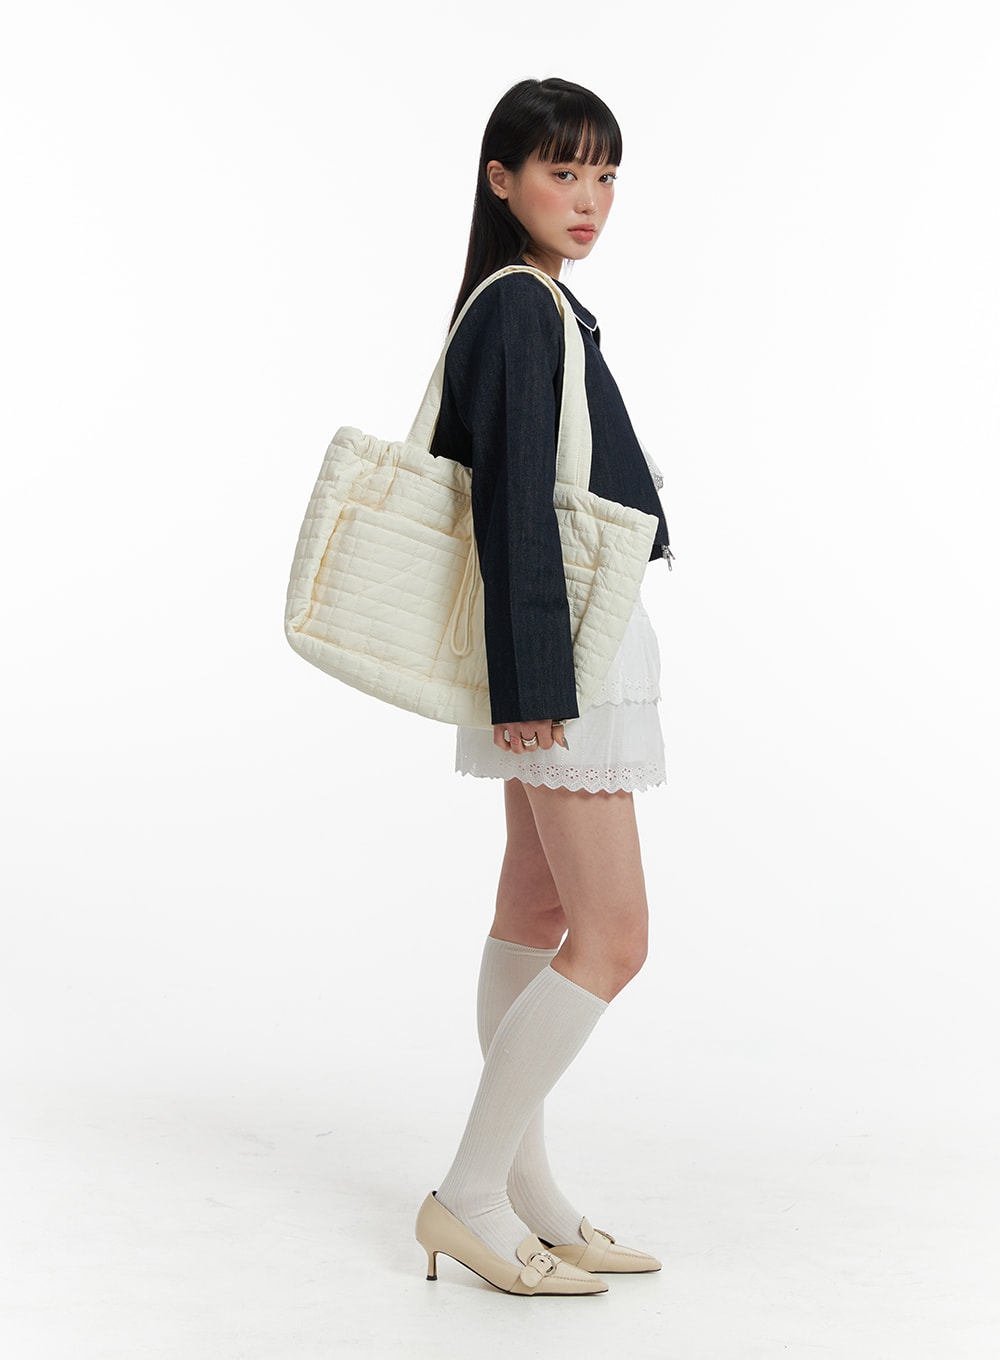 quilted-string-tote-bag-if423